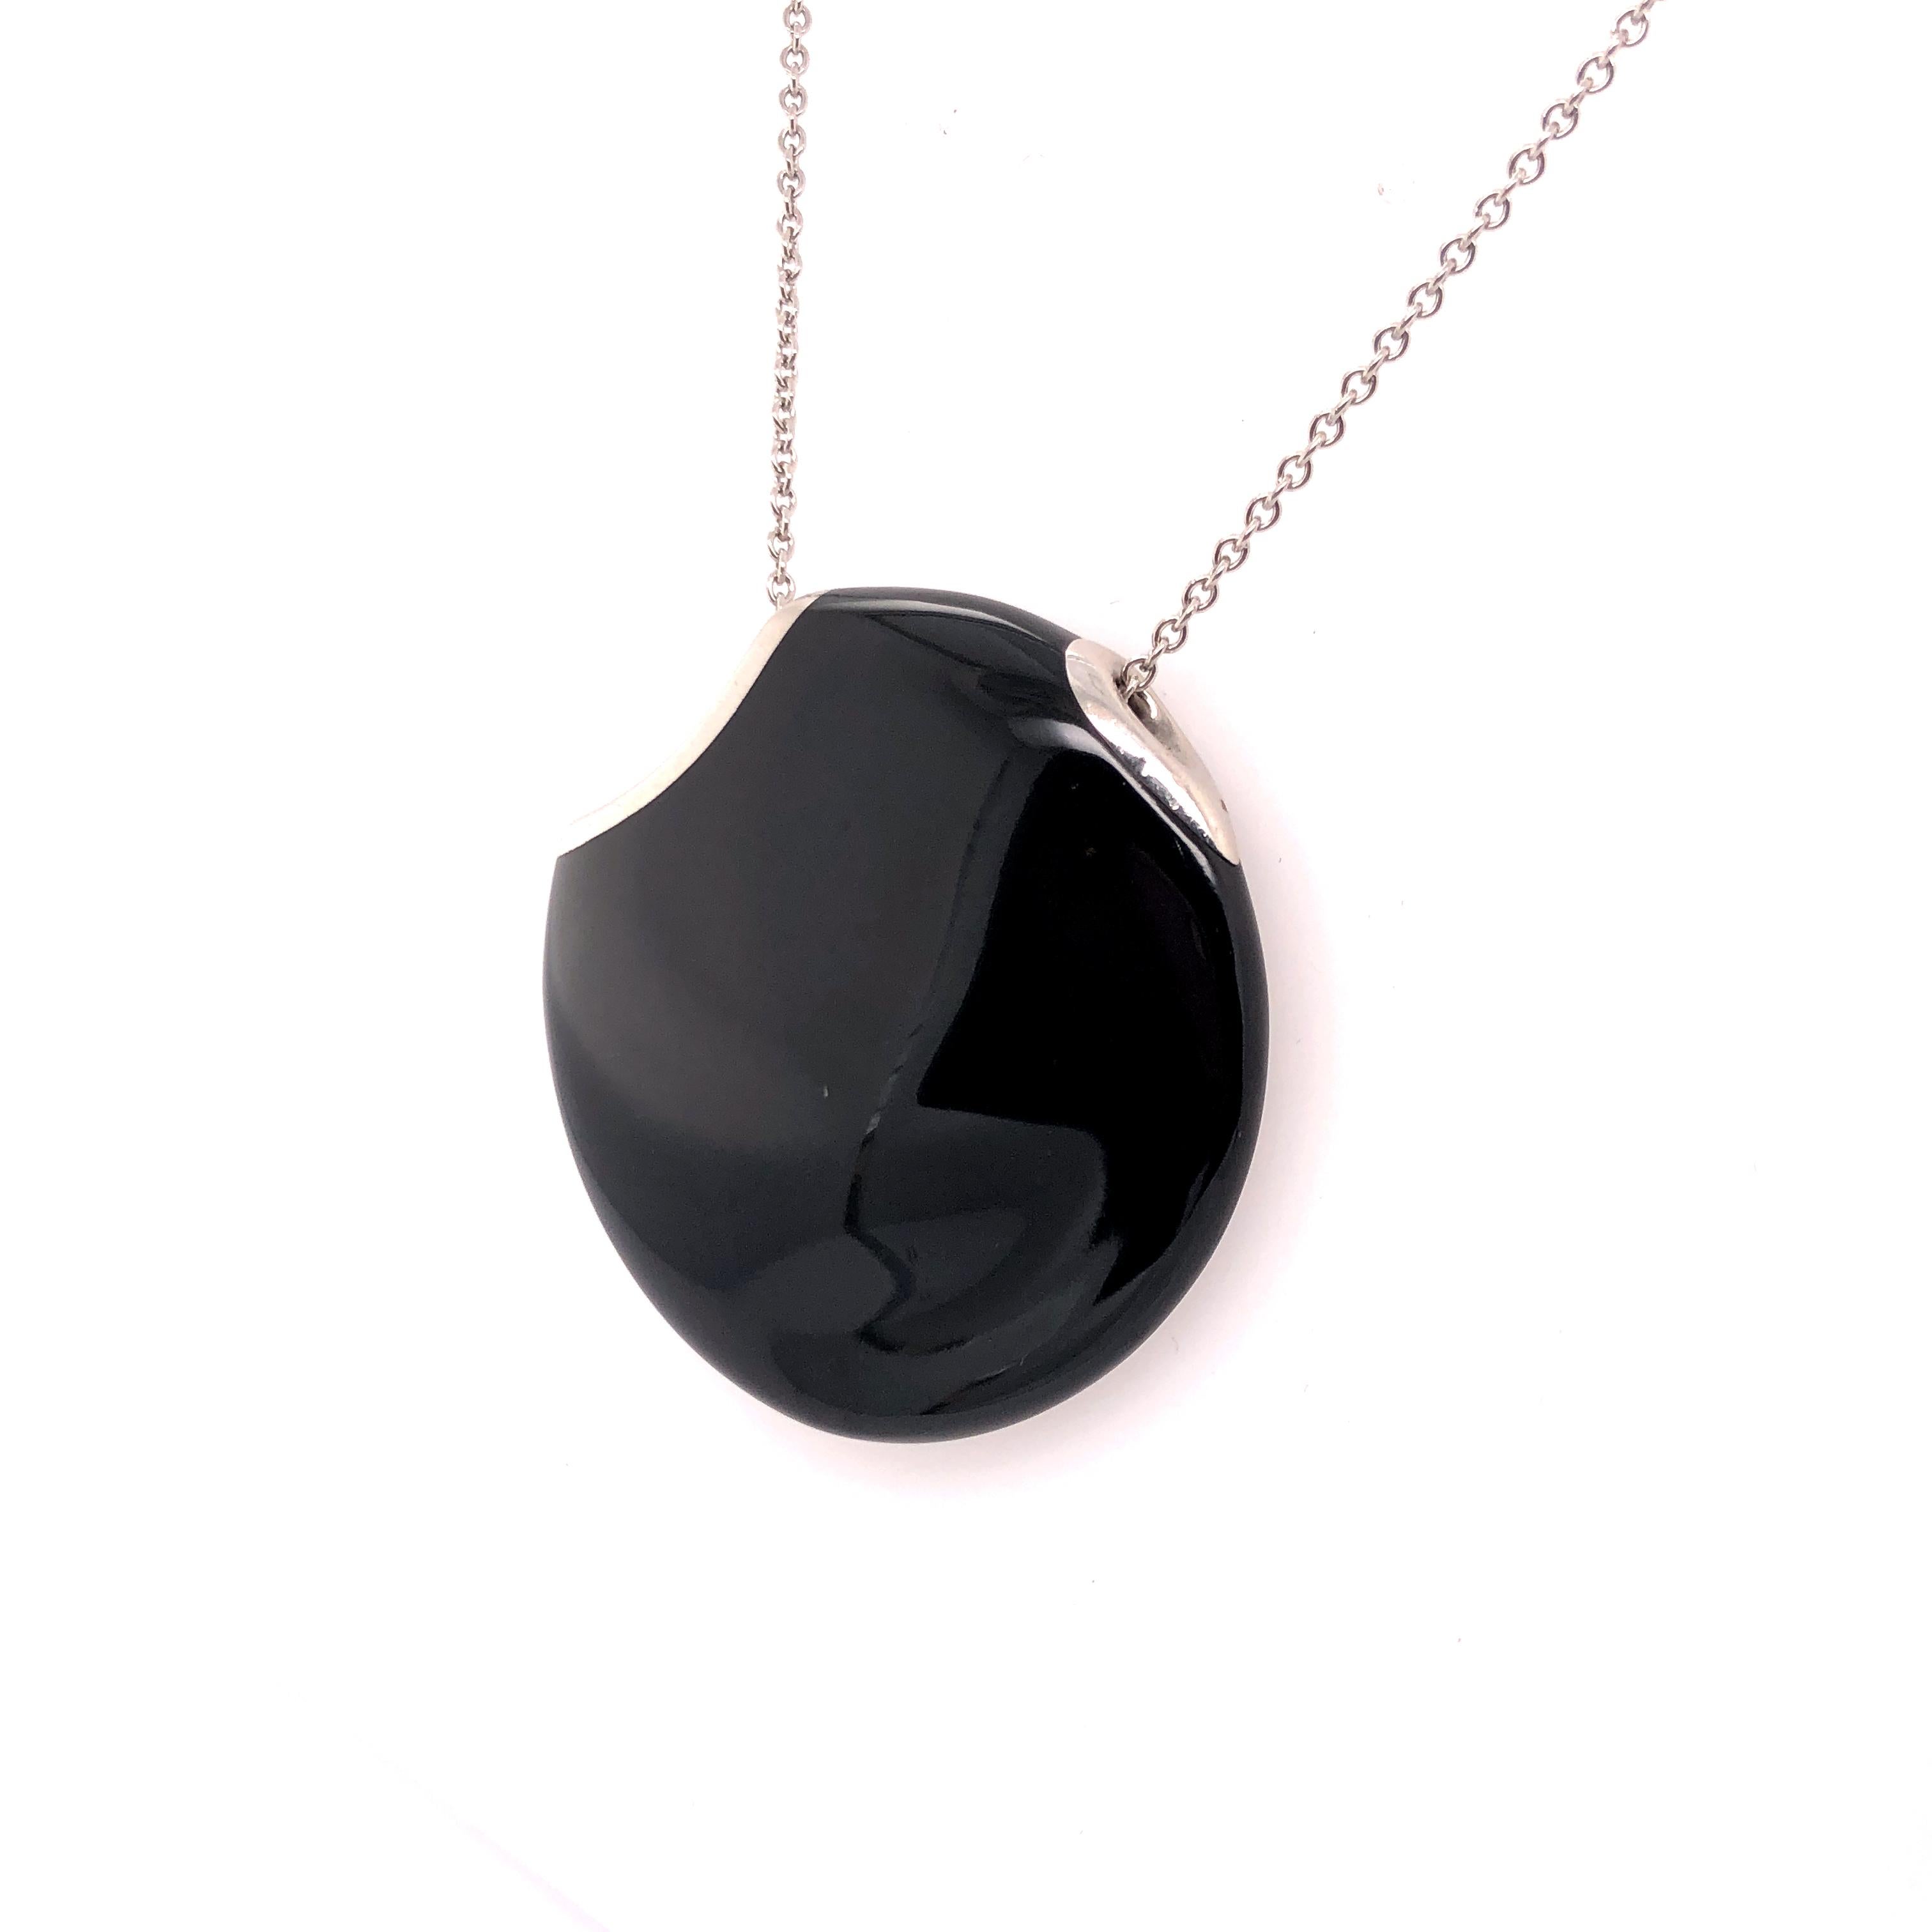 Elsa Peretti's platinum black enamel that she designed for Tiffany & Co. is a wonderful every day necklace. Easily transition from work to a night on the town. 

The irregular pendant sits on a 28